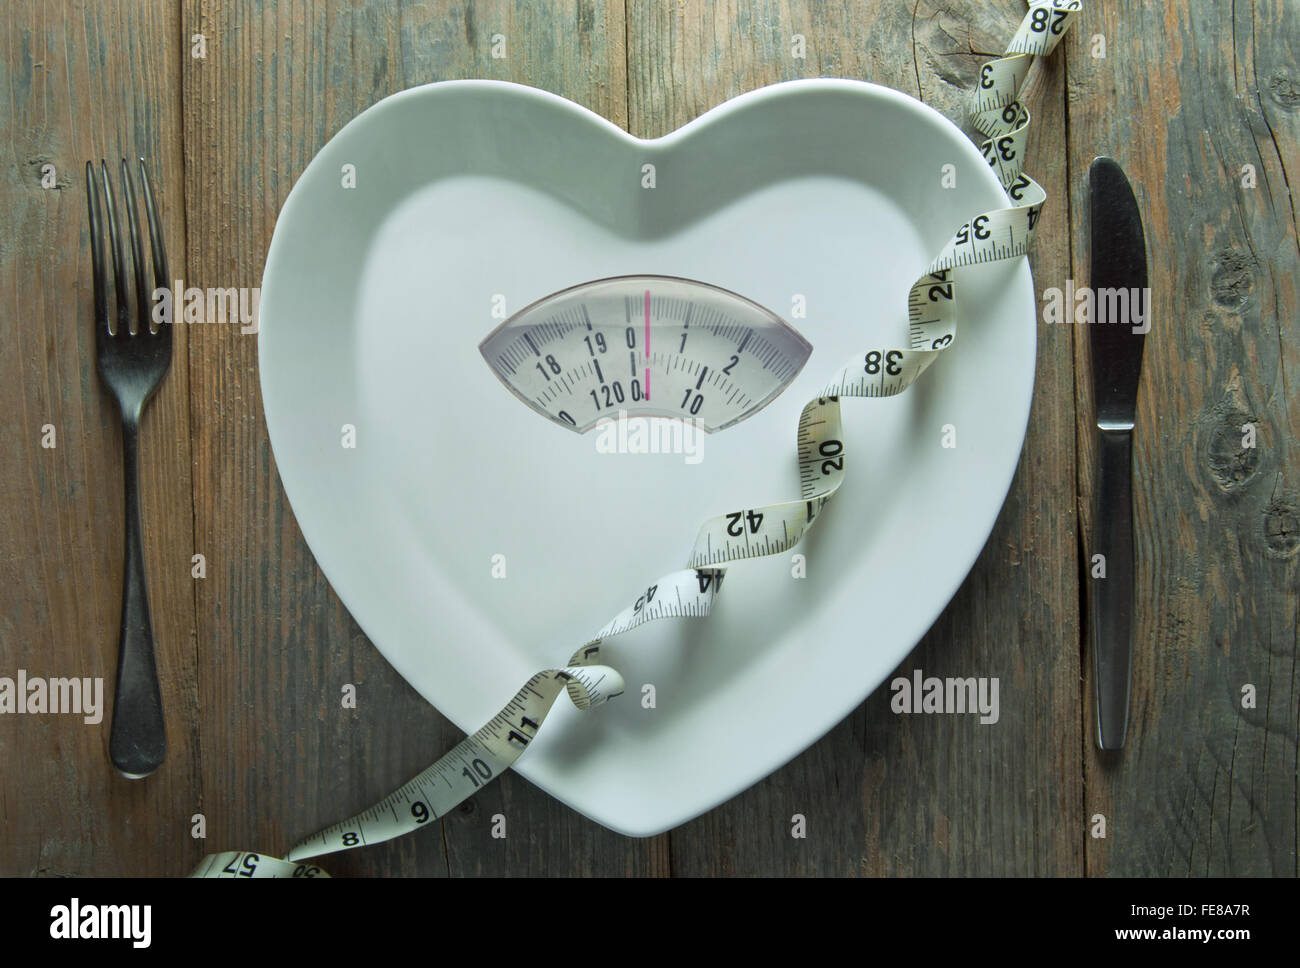 Heart shape plate with weighing scales and tape measure Stock Photo